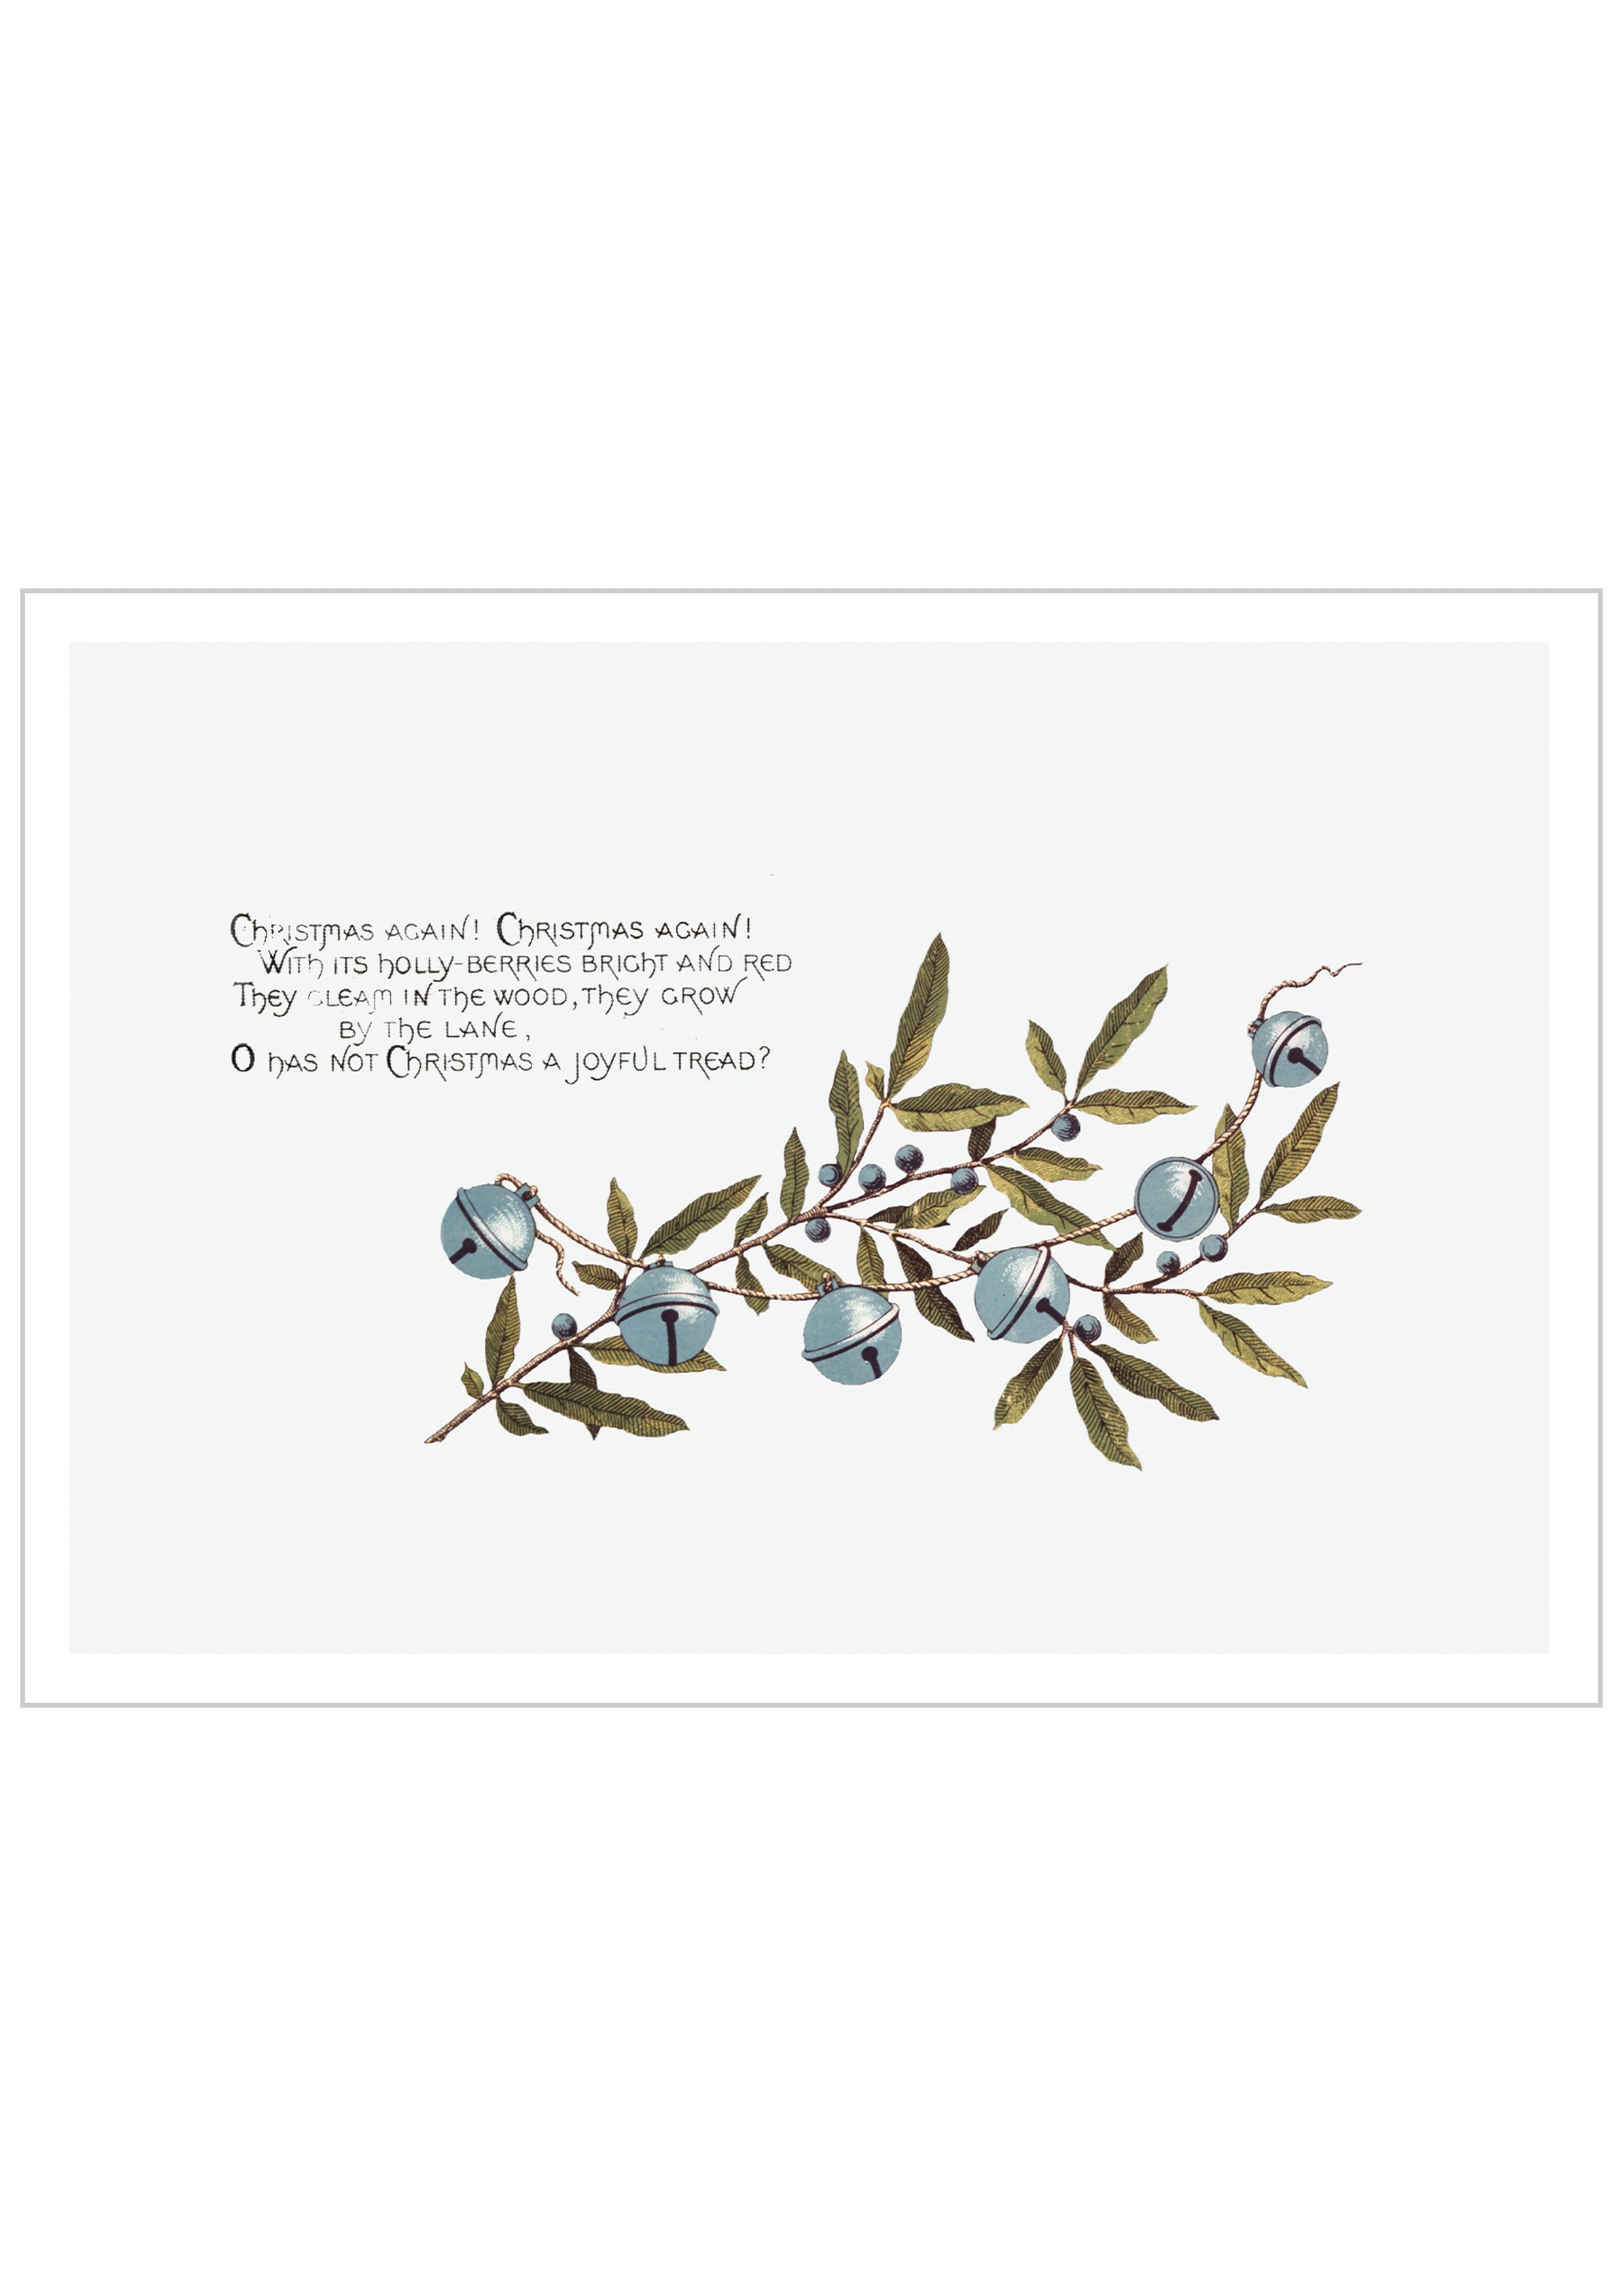 An illustration Depicting Bells and Blueberries with a poem "Christmas again, Christmas again!"An illustration Depicting Bells and Blueberries with a poem "Christmas again, Christmas again!"